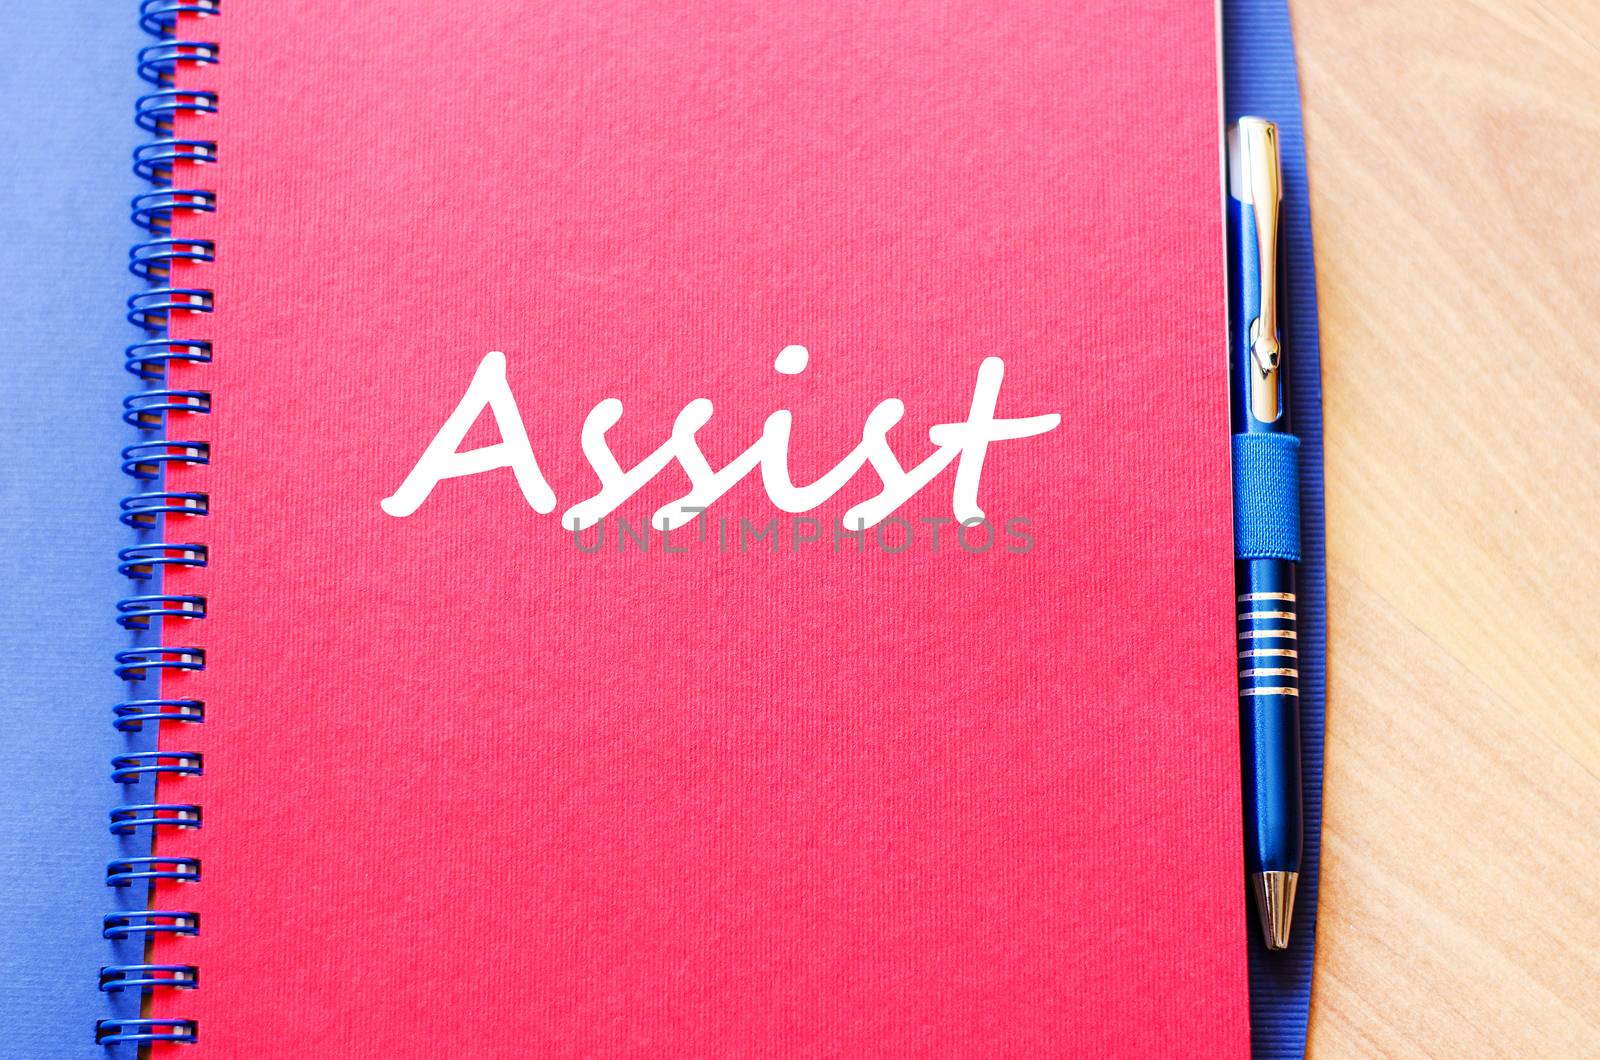 Assist text concept write on notebook with pen